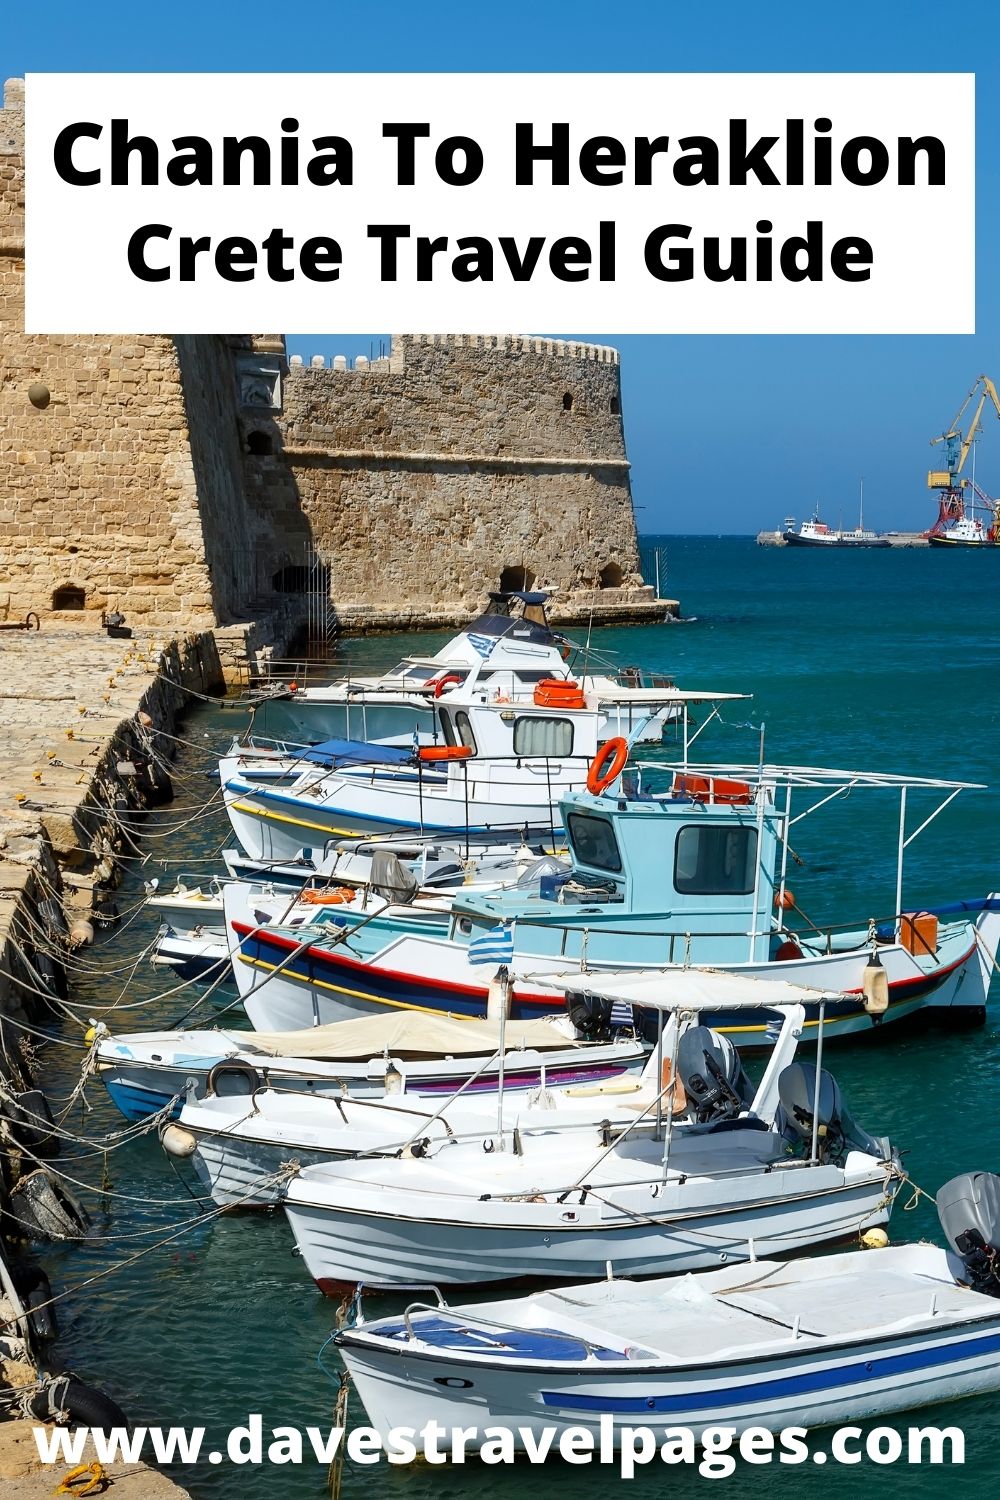 The best ways to get from Chania to Heraklion in Crete